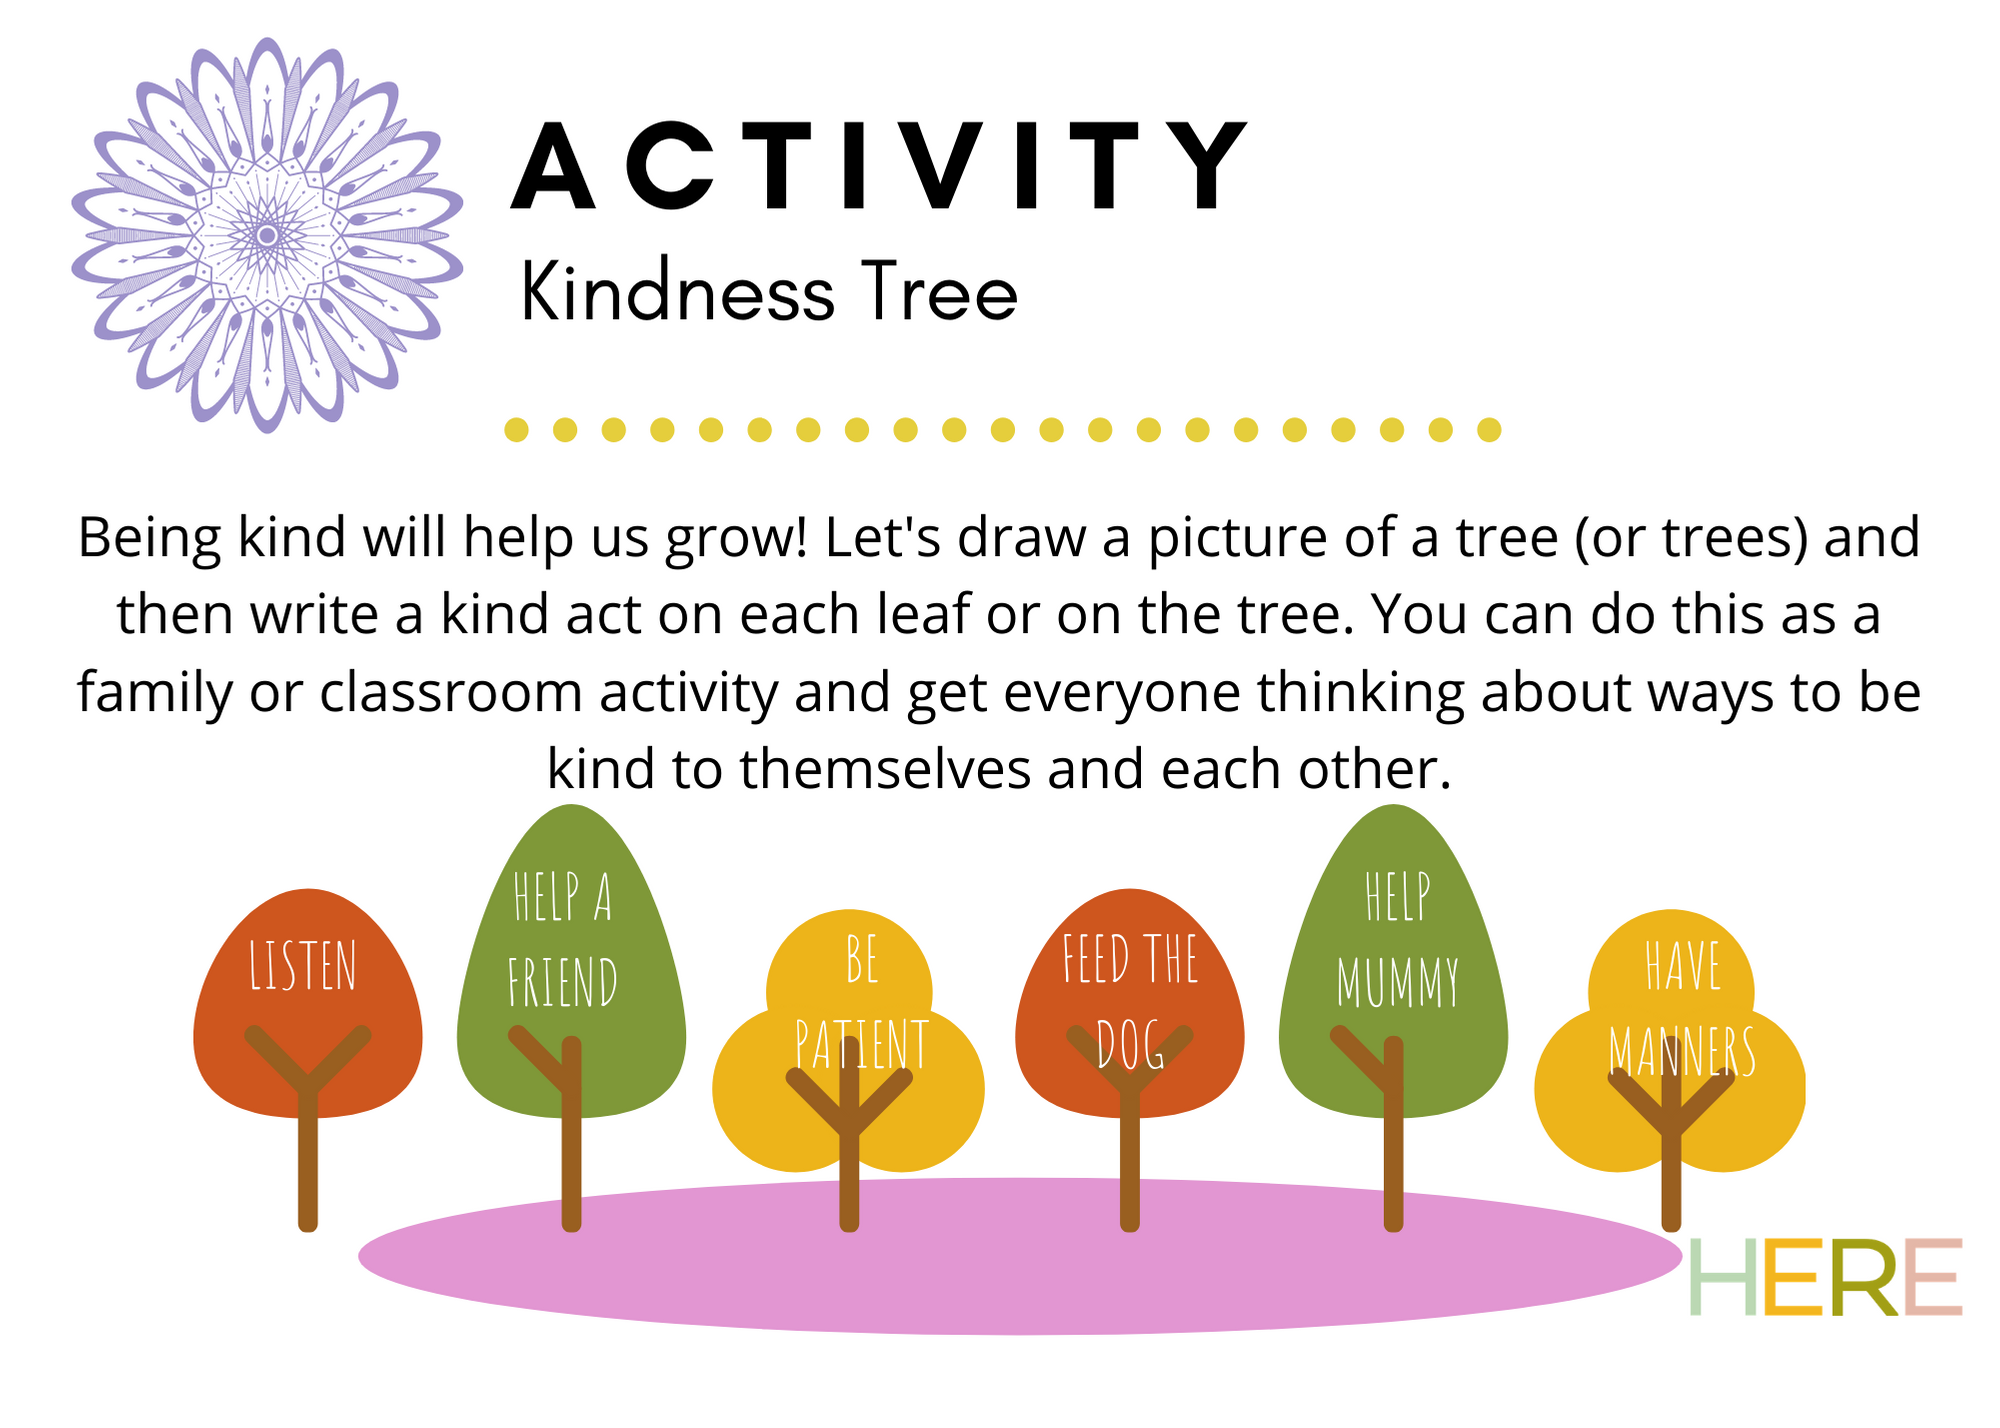 Activity Kindness Tree.png